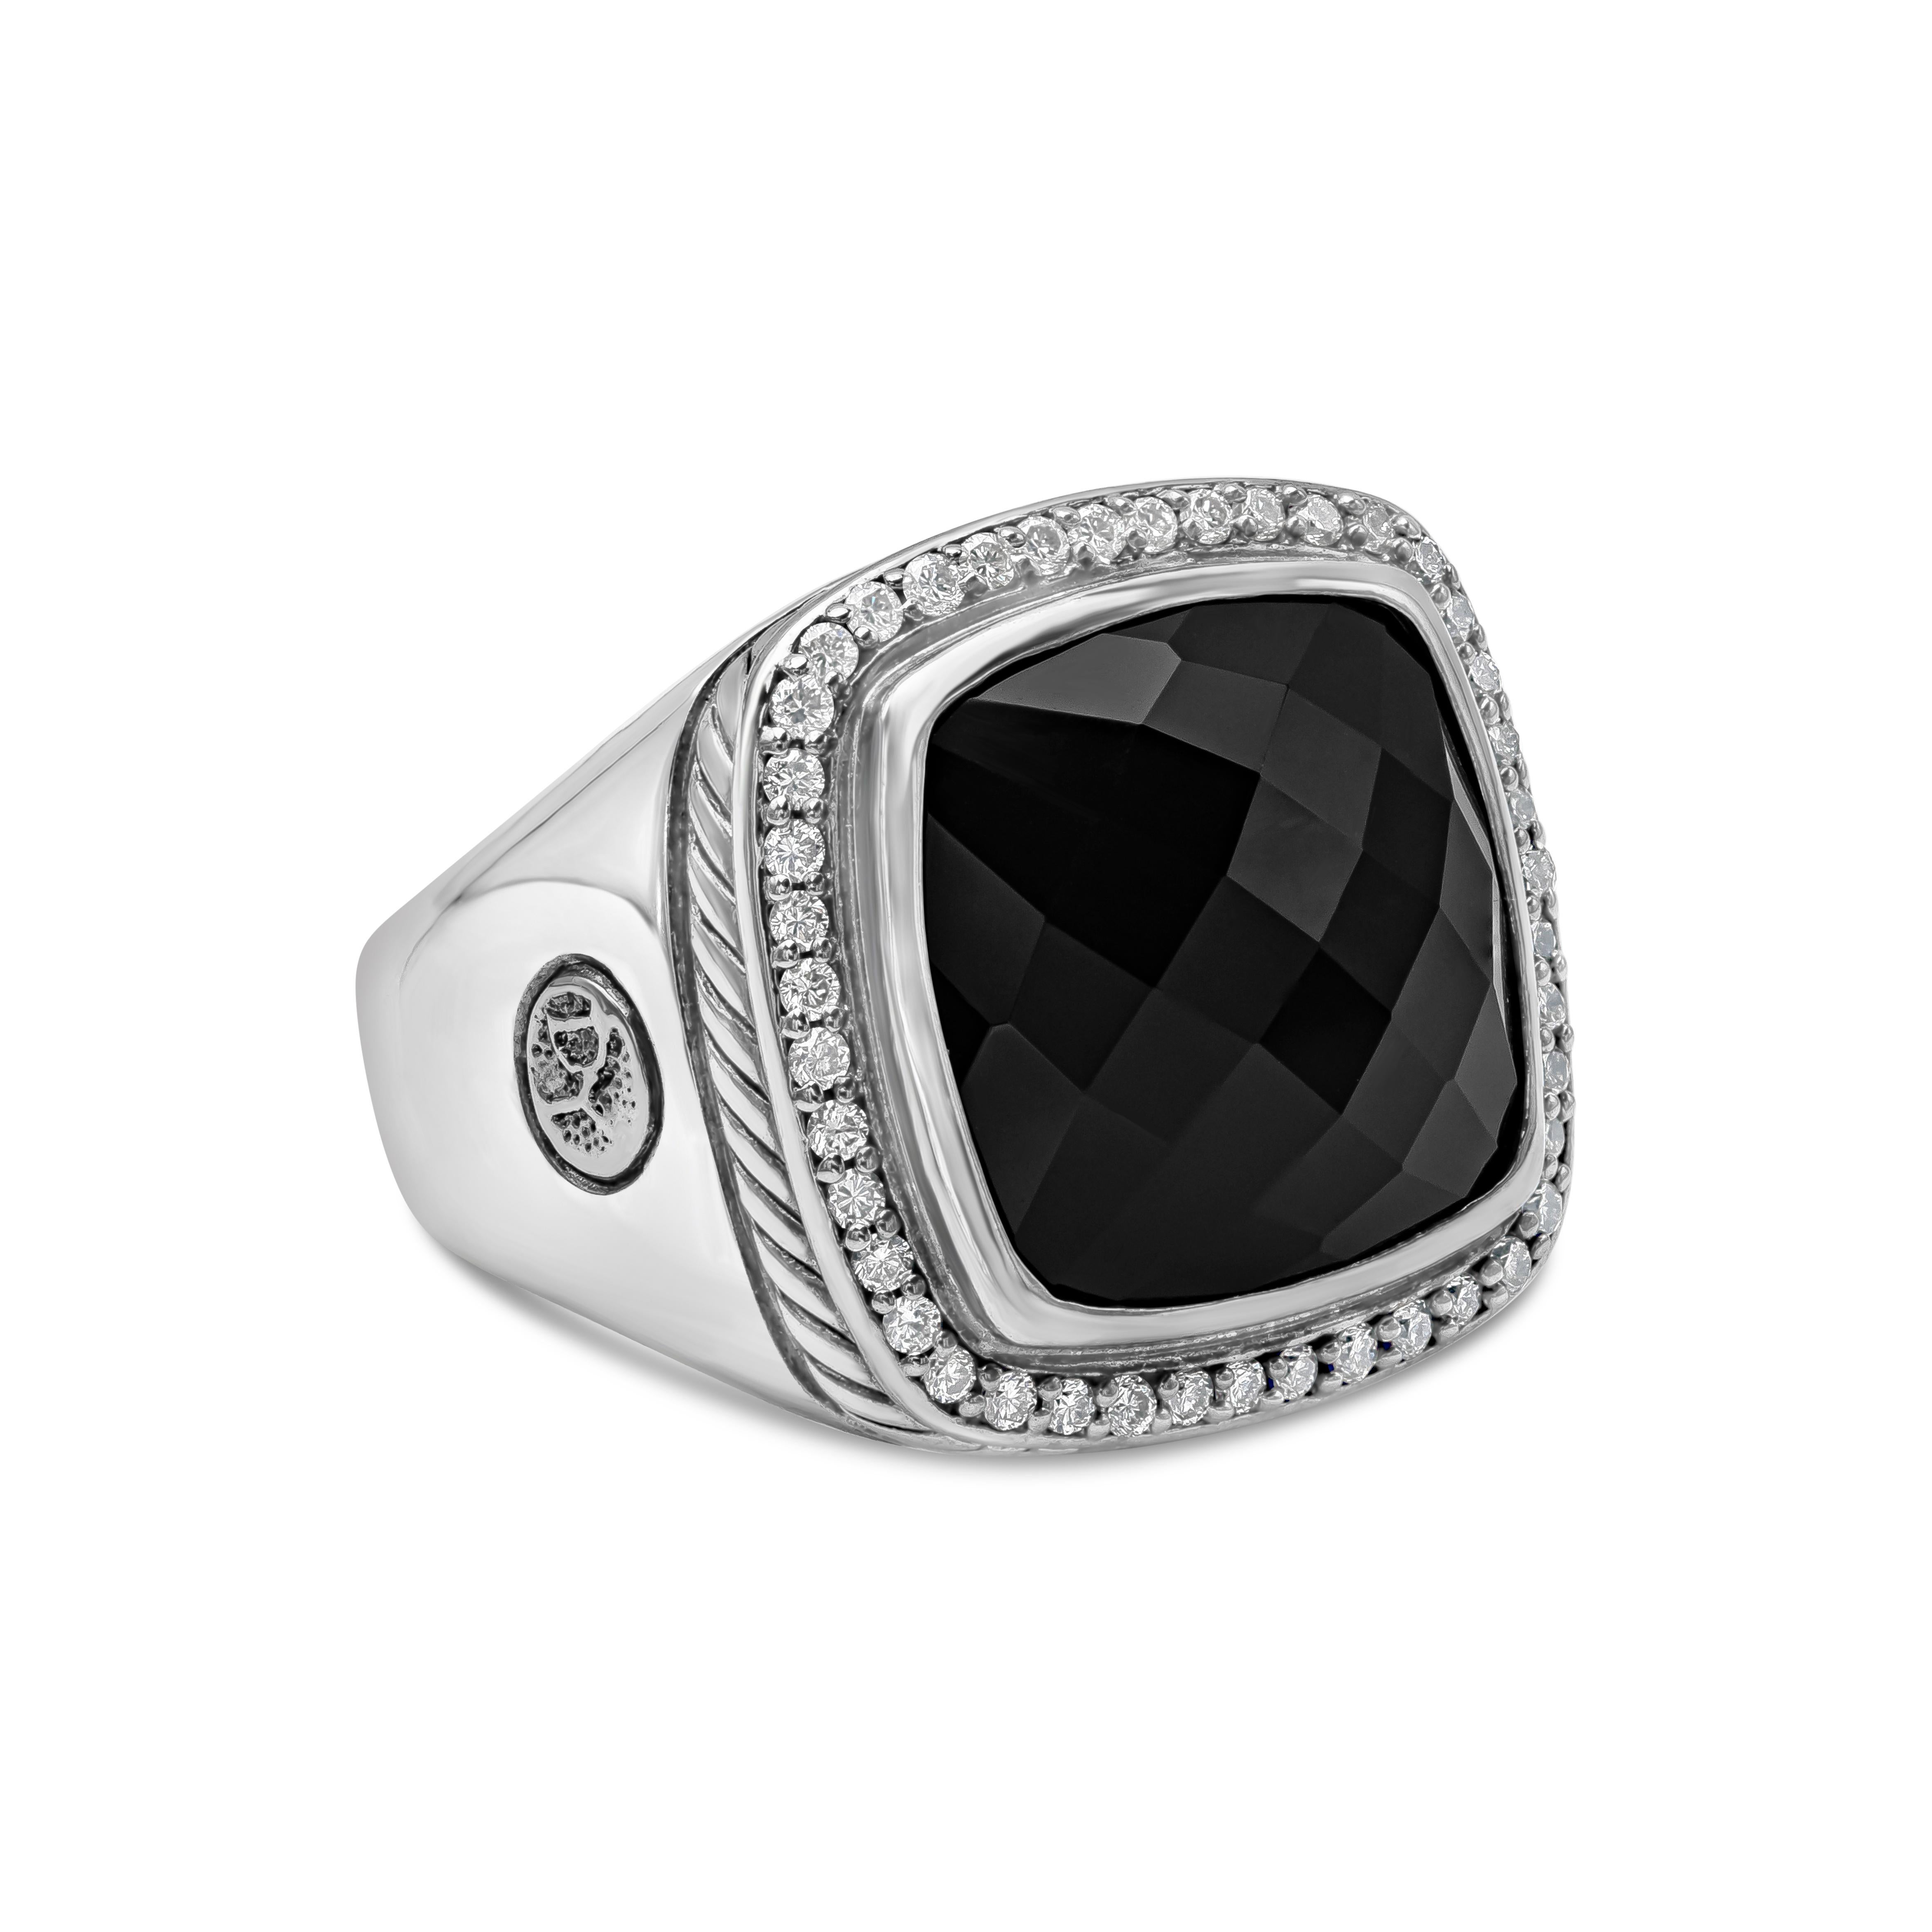 A beautiful and unique cocktail ring showcasing a large faceted black onyx, surrounded by a single row of round brilliant diamonds. Set in an intricately designed cocktail band made in sterling silver. Made and signed by David Yurman. 